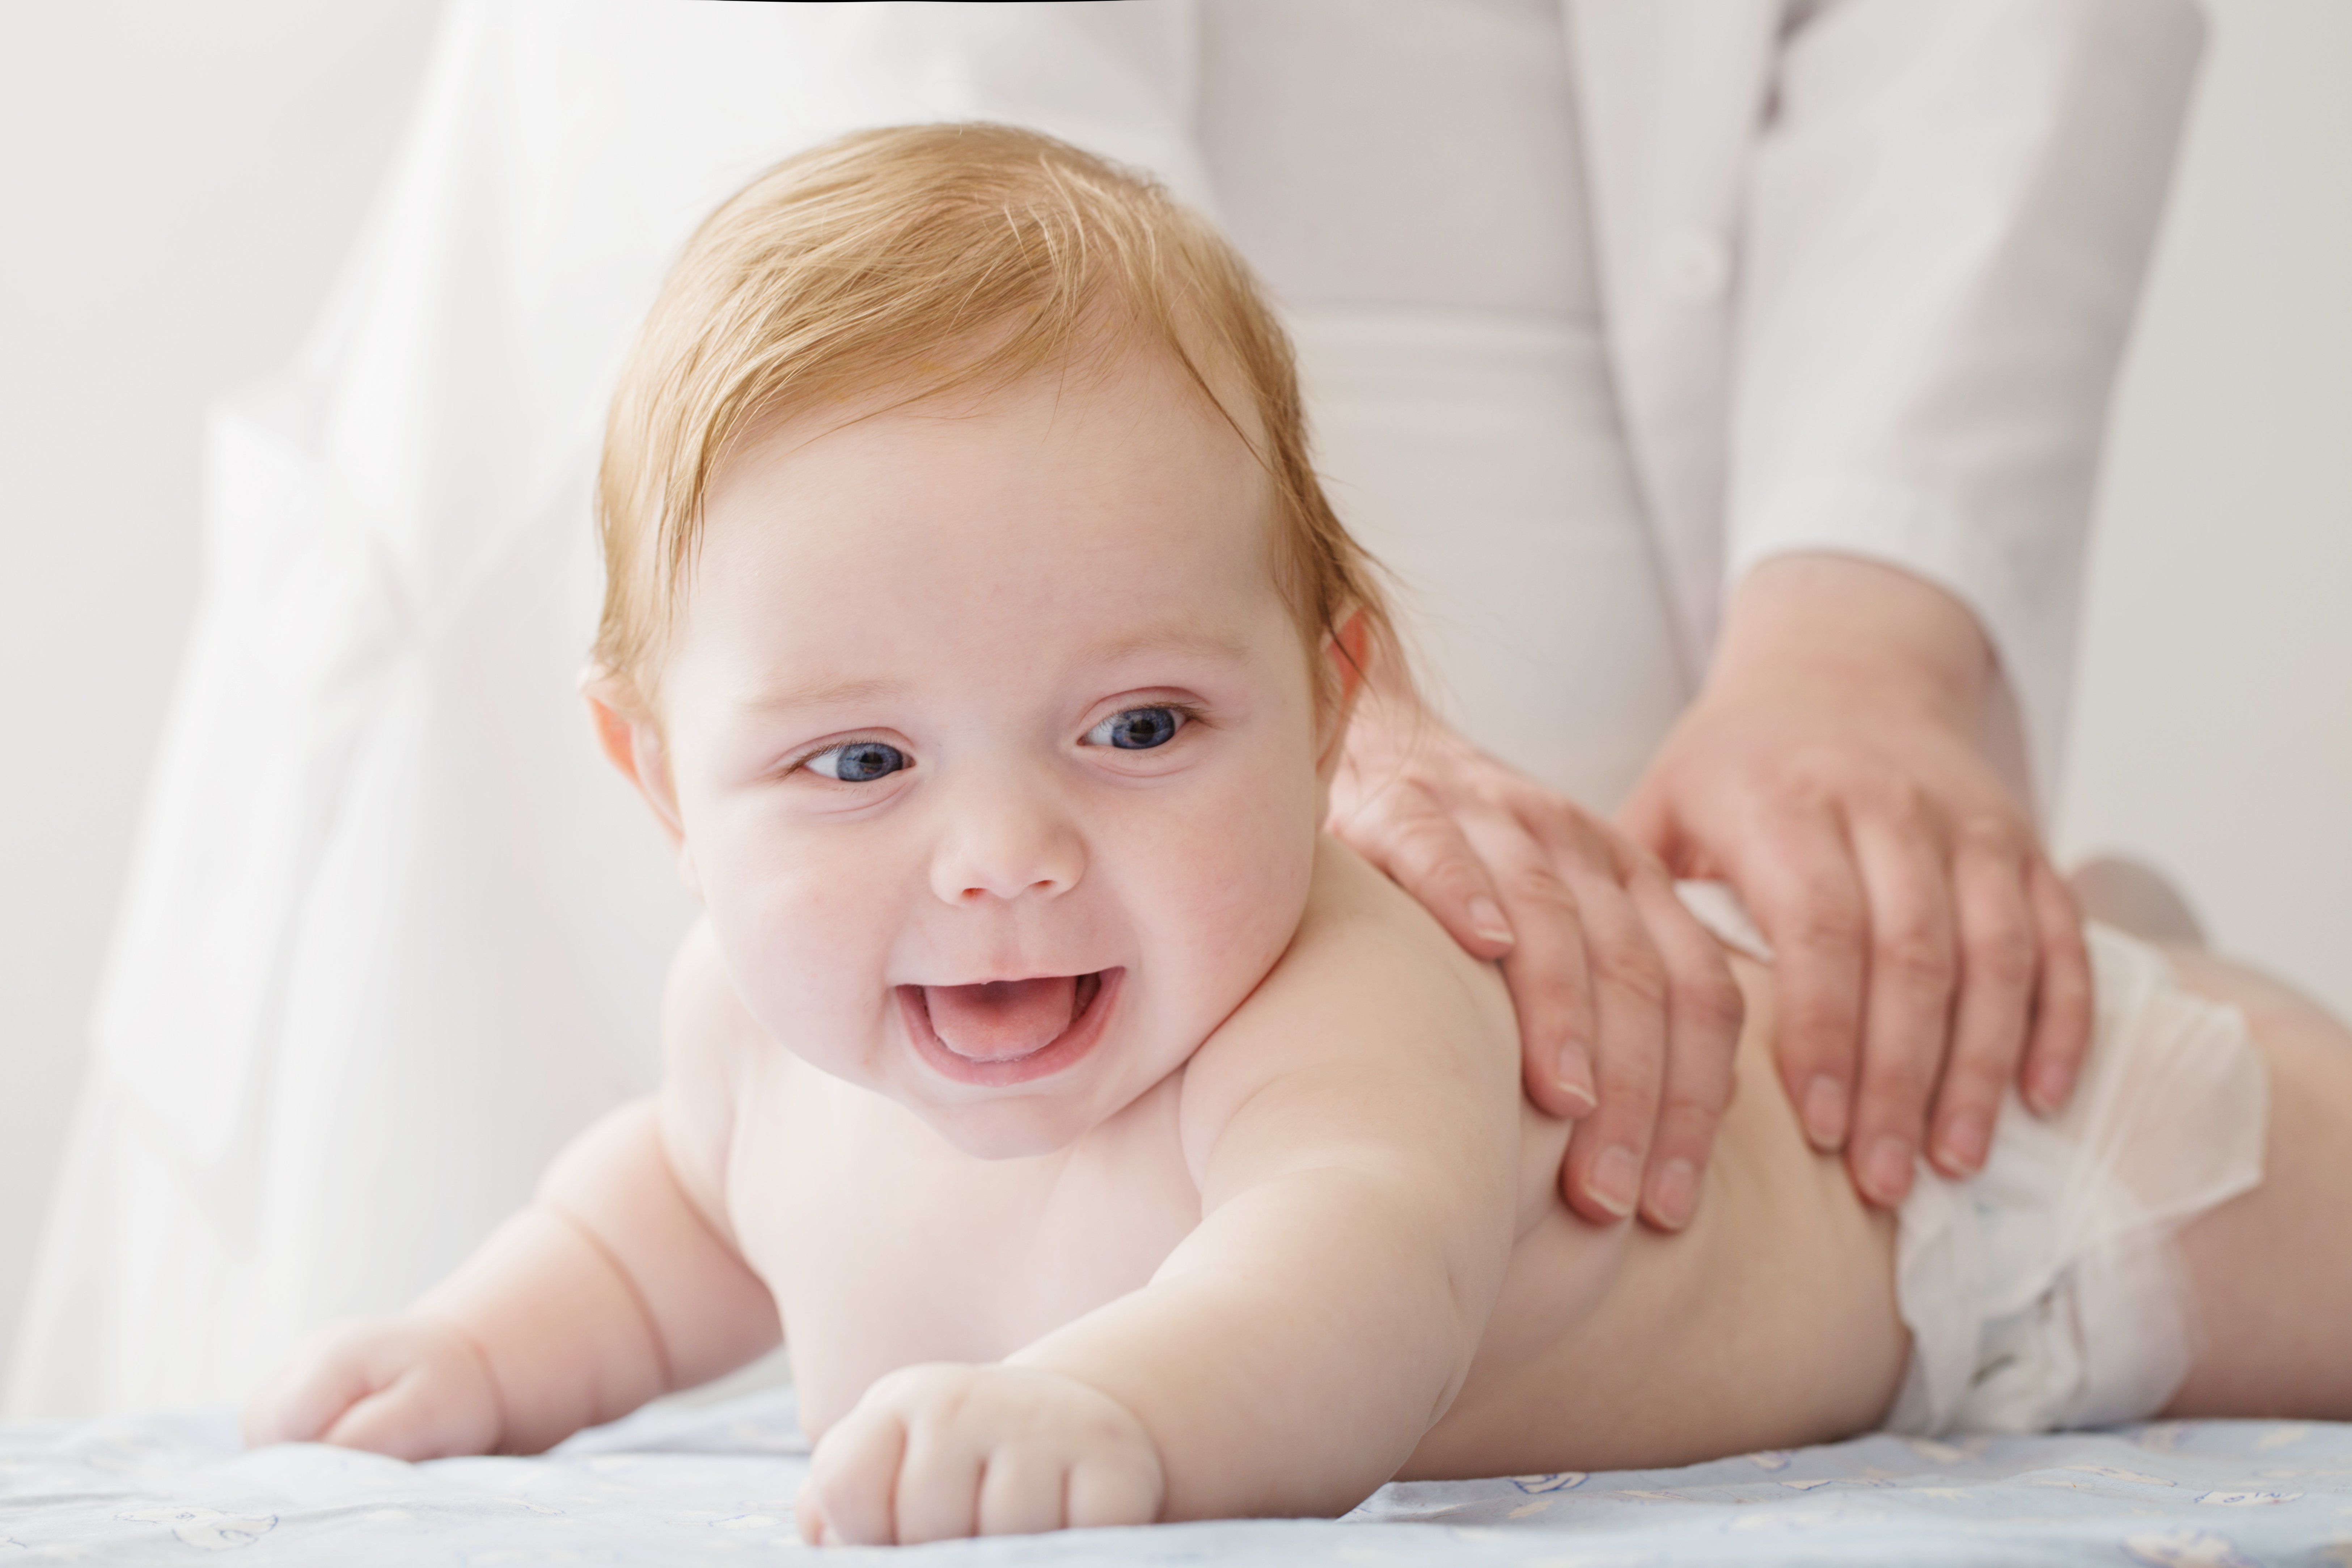 What Are the Benefits of Taking Your Newborn to the Chiropractor?